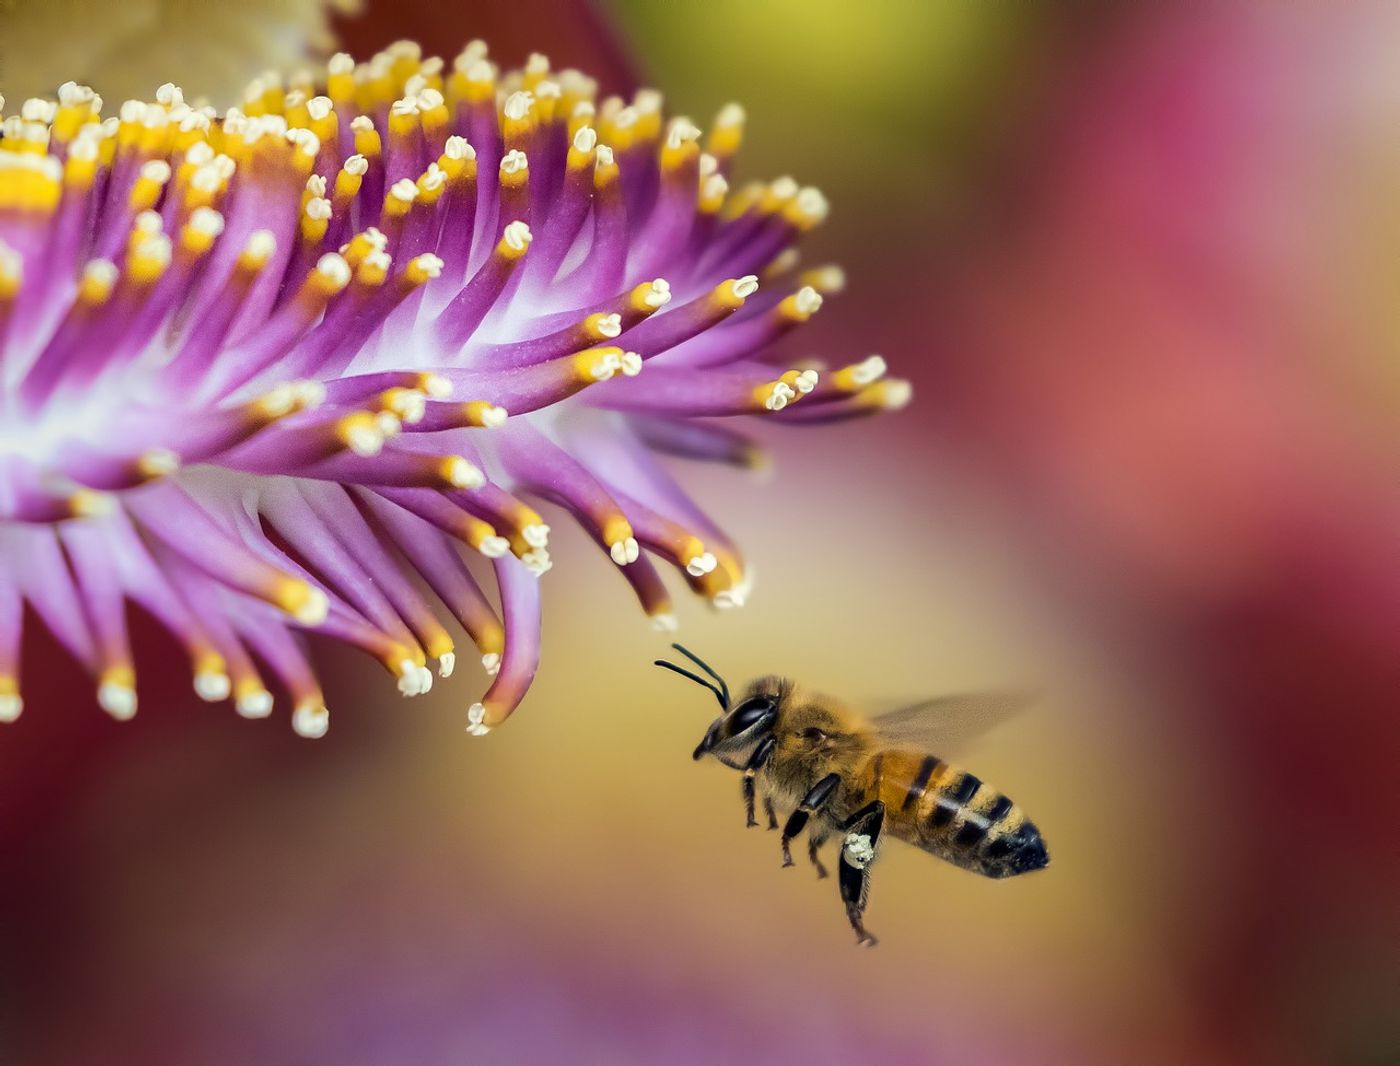 Honeybees in Scotland are now threatened by non-native species being imported intot he country.